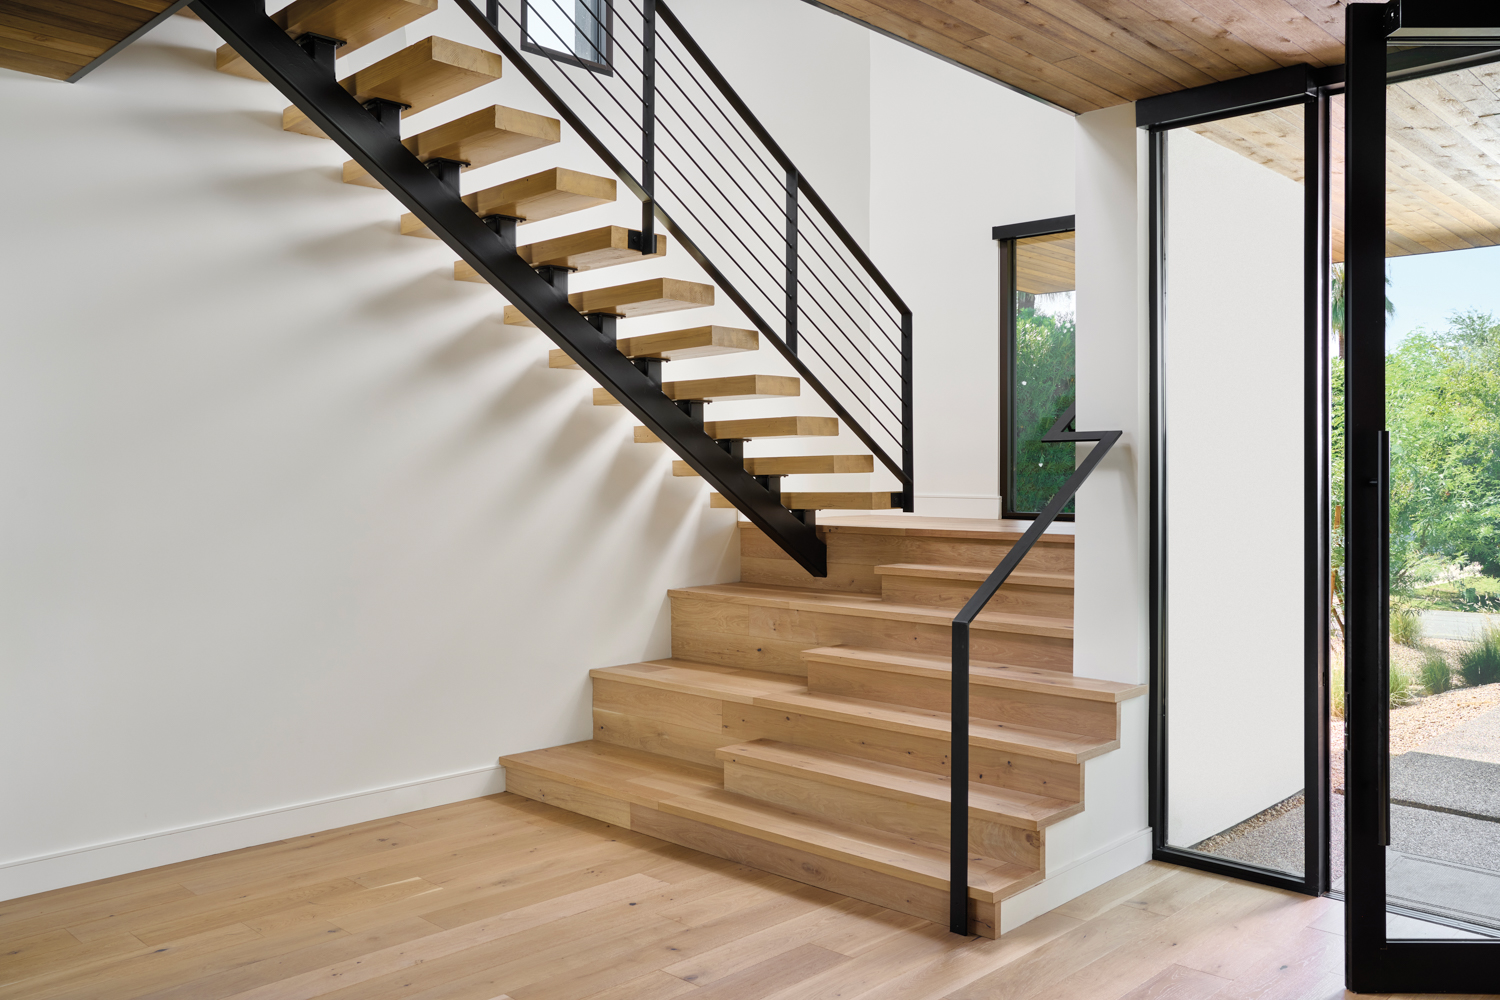 A light oak staircase with...